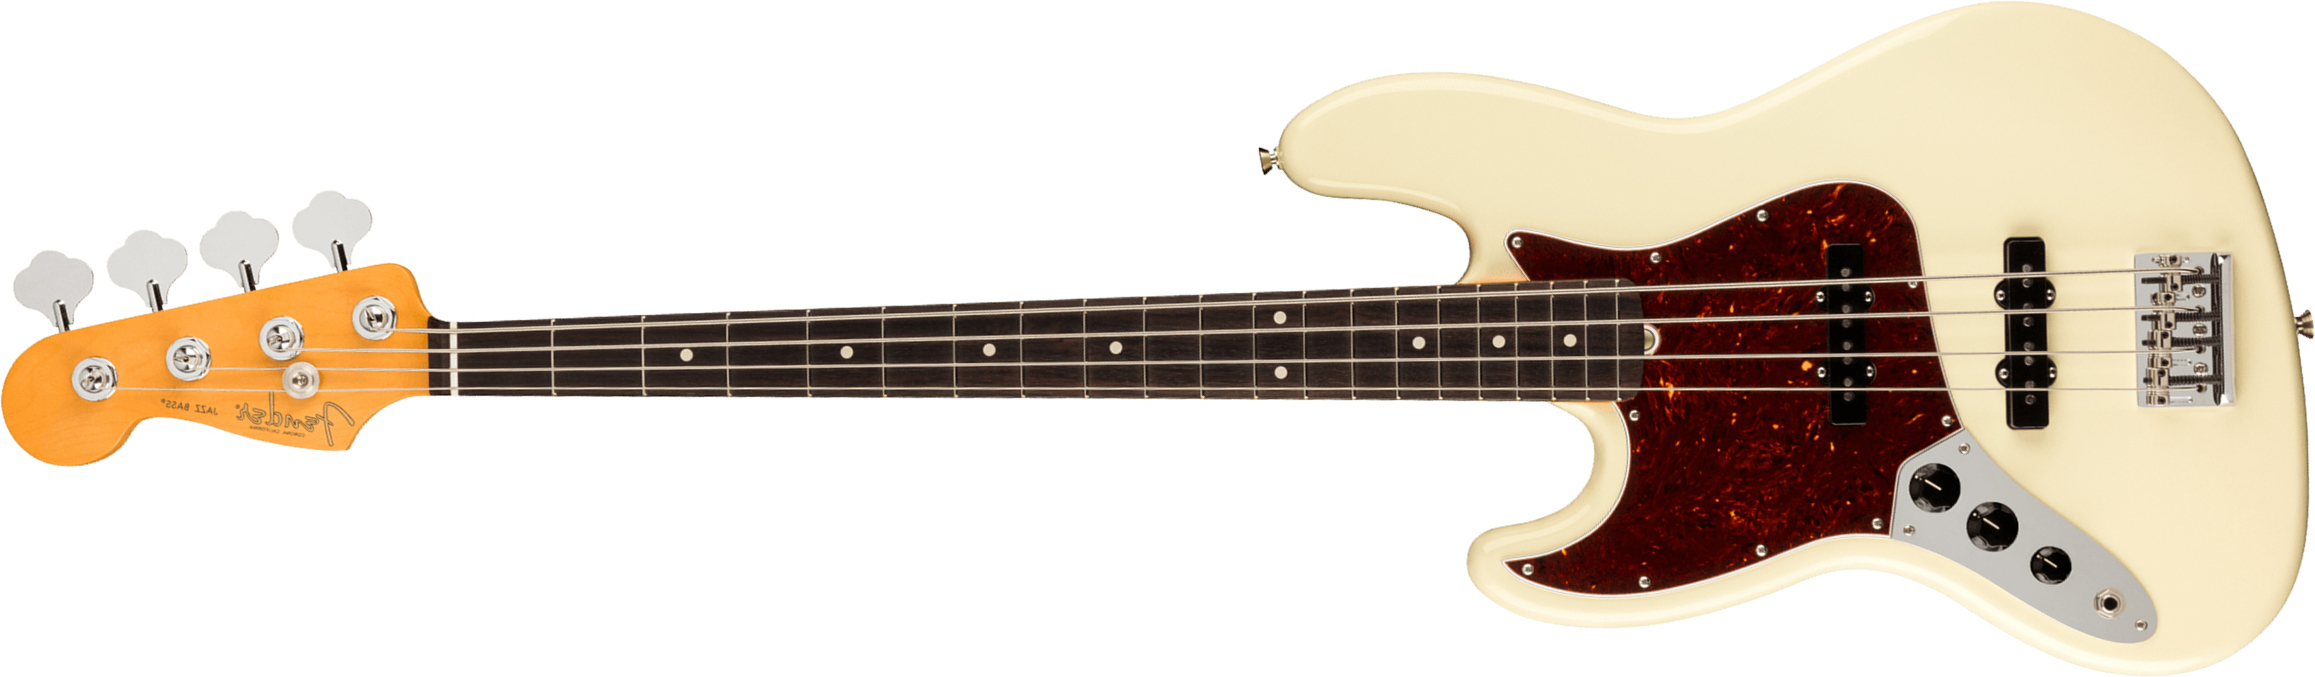 Fender Jazz Bass American Professional Ii Lh Gaucher Usa Rw - Olympic White - Solid body electric bass - Main picture